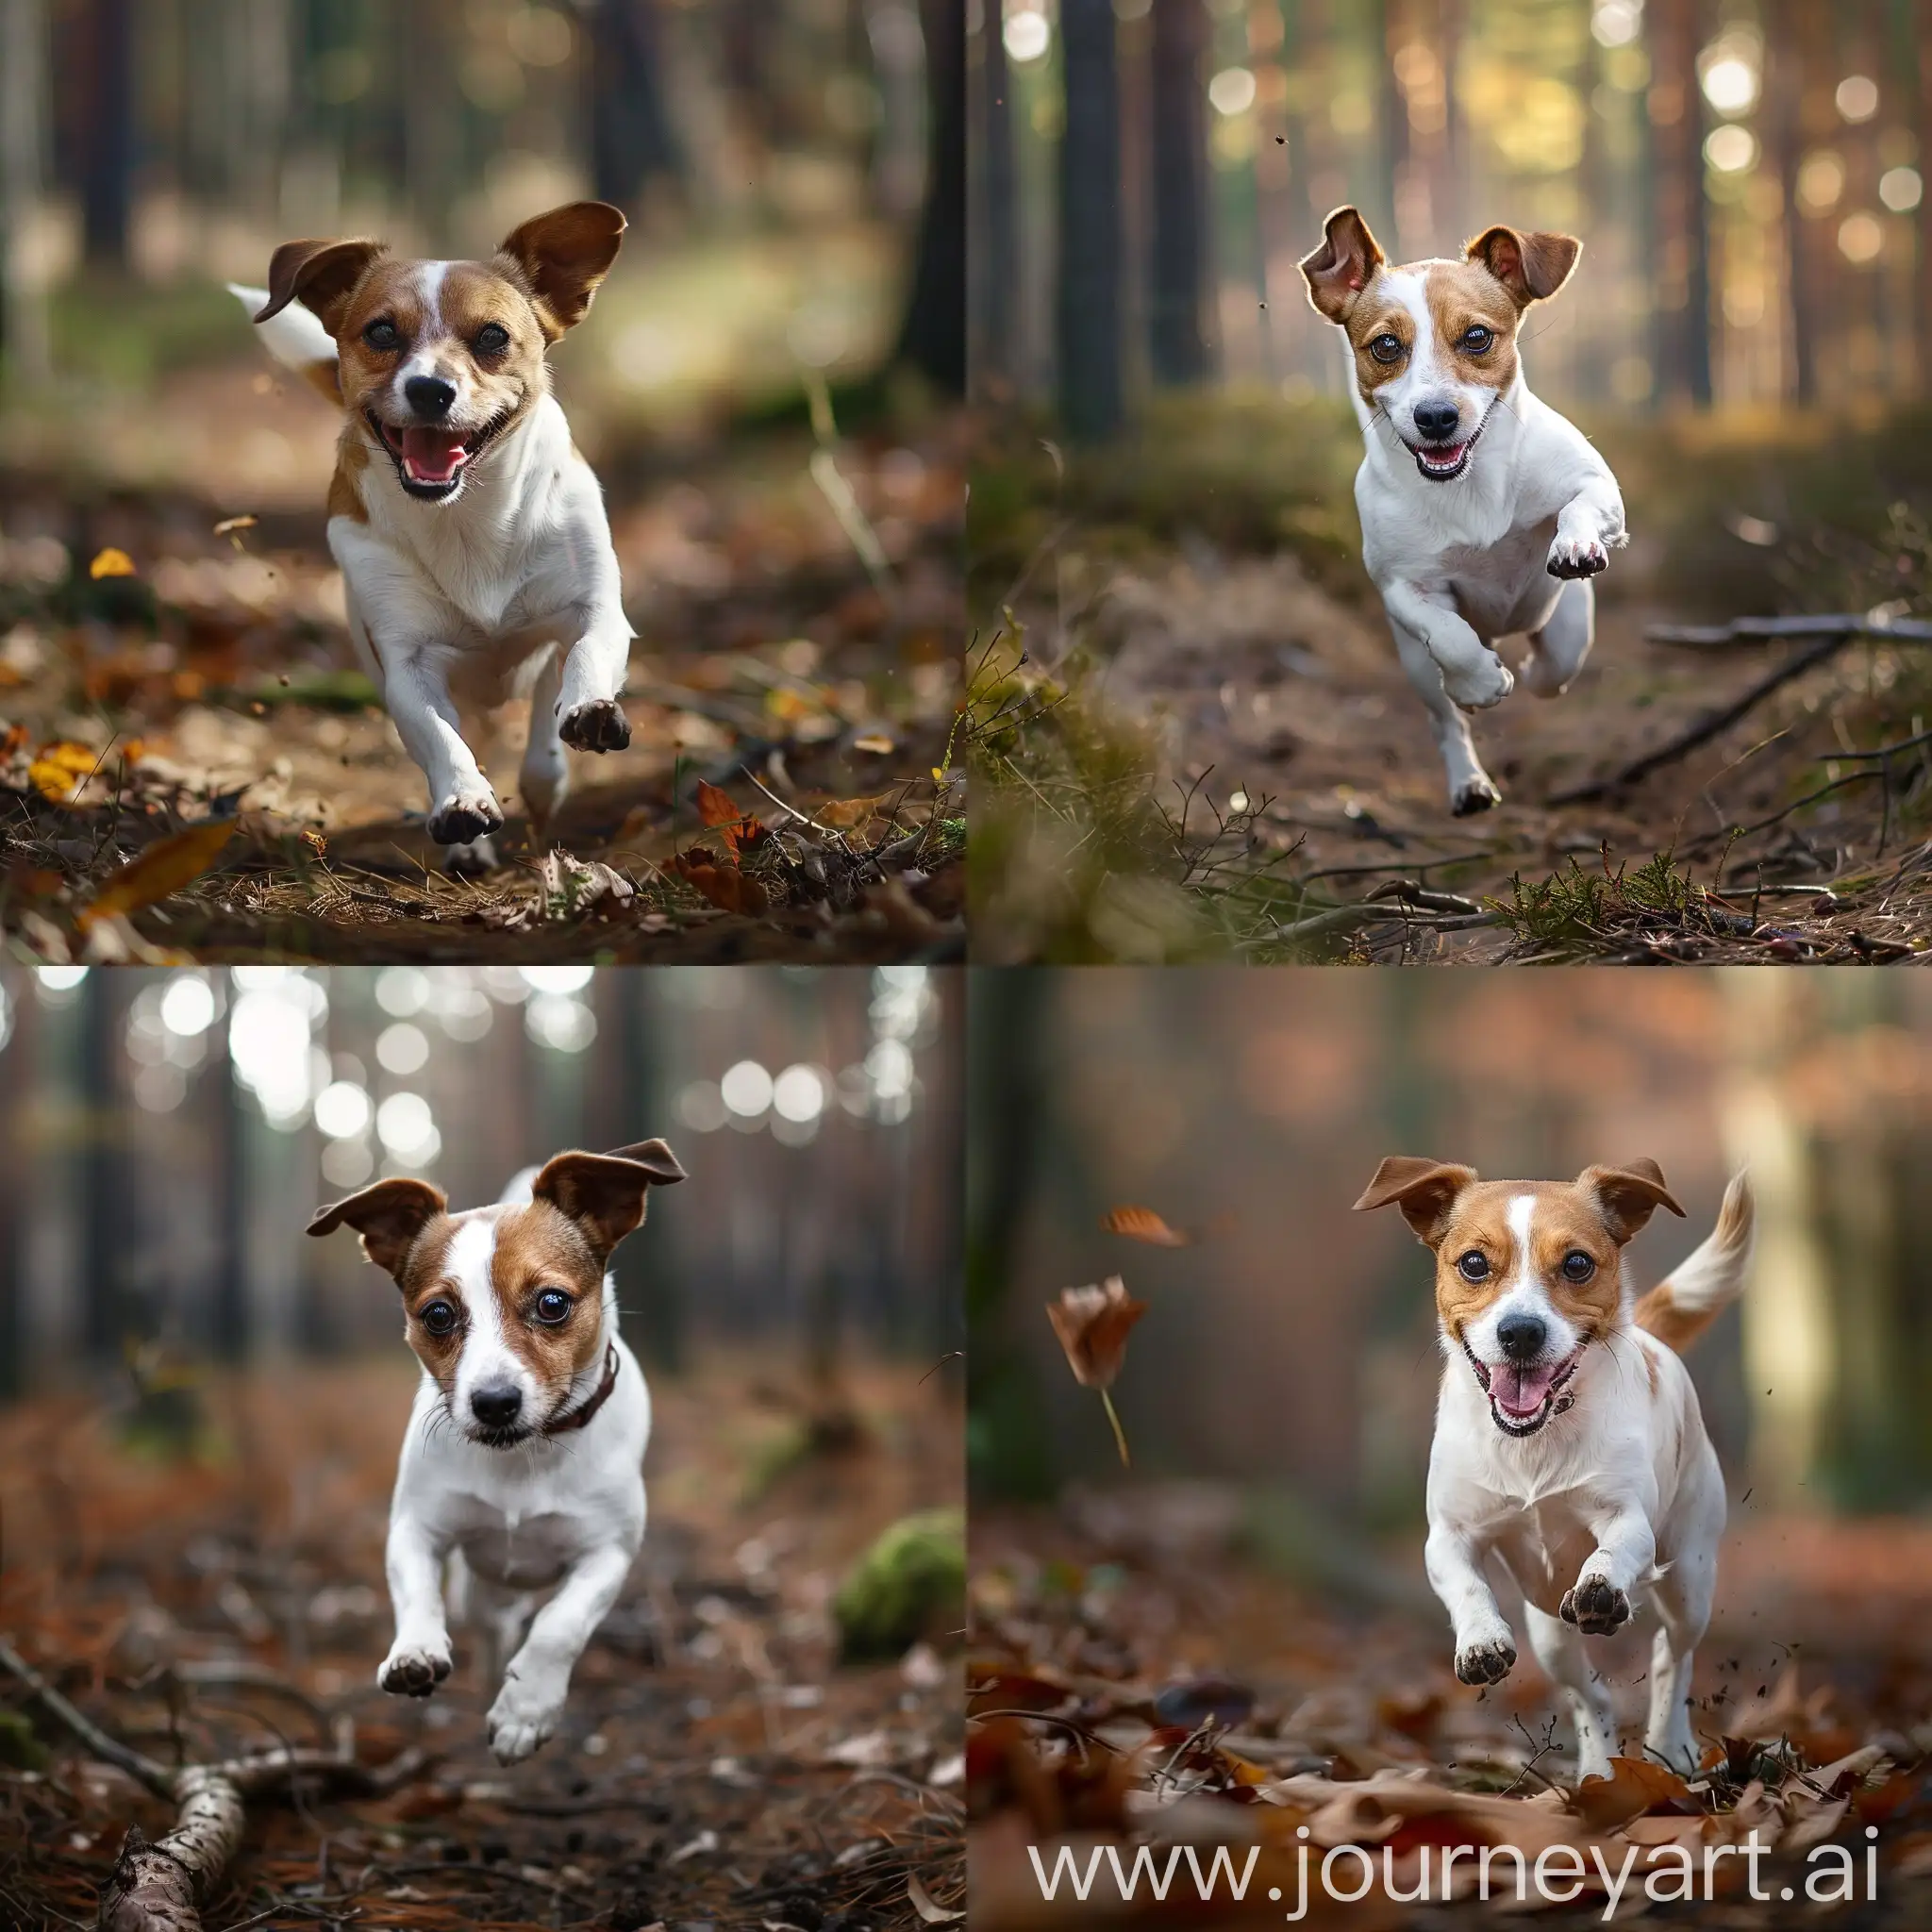 A Jack russel dog running in a forest